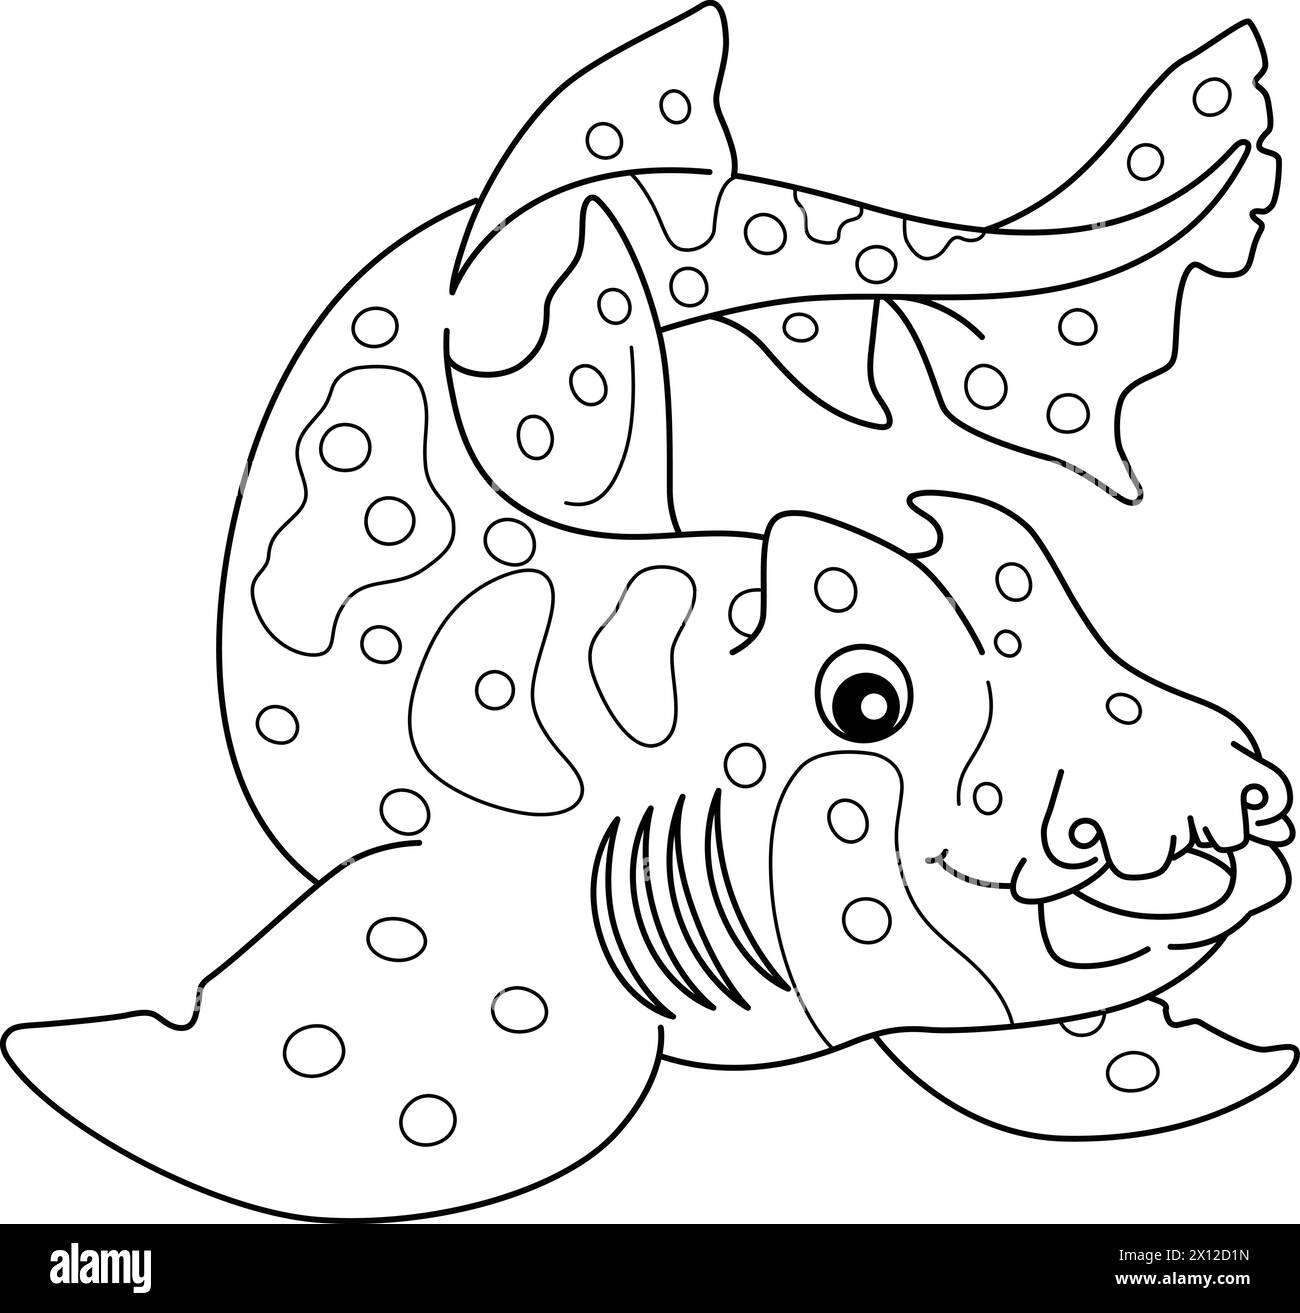 Horn Shark Isolated Coloring Page for Kids Stock Vector